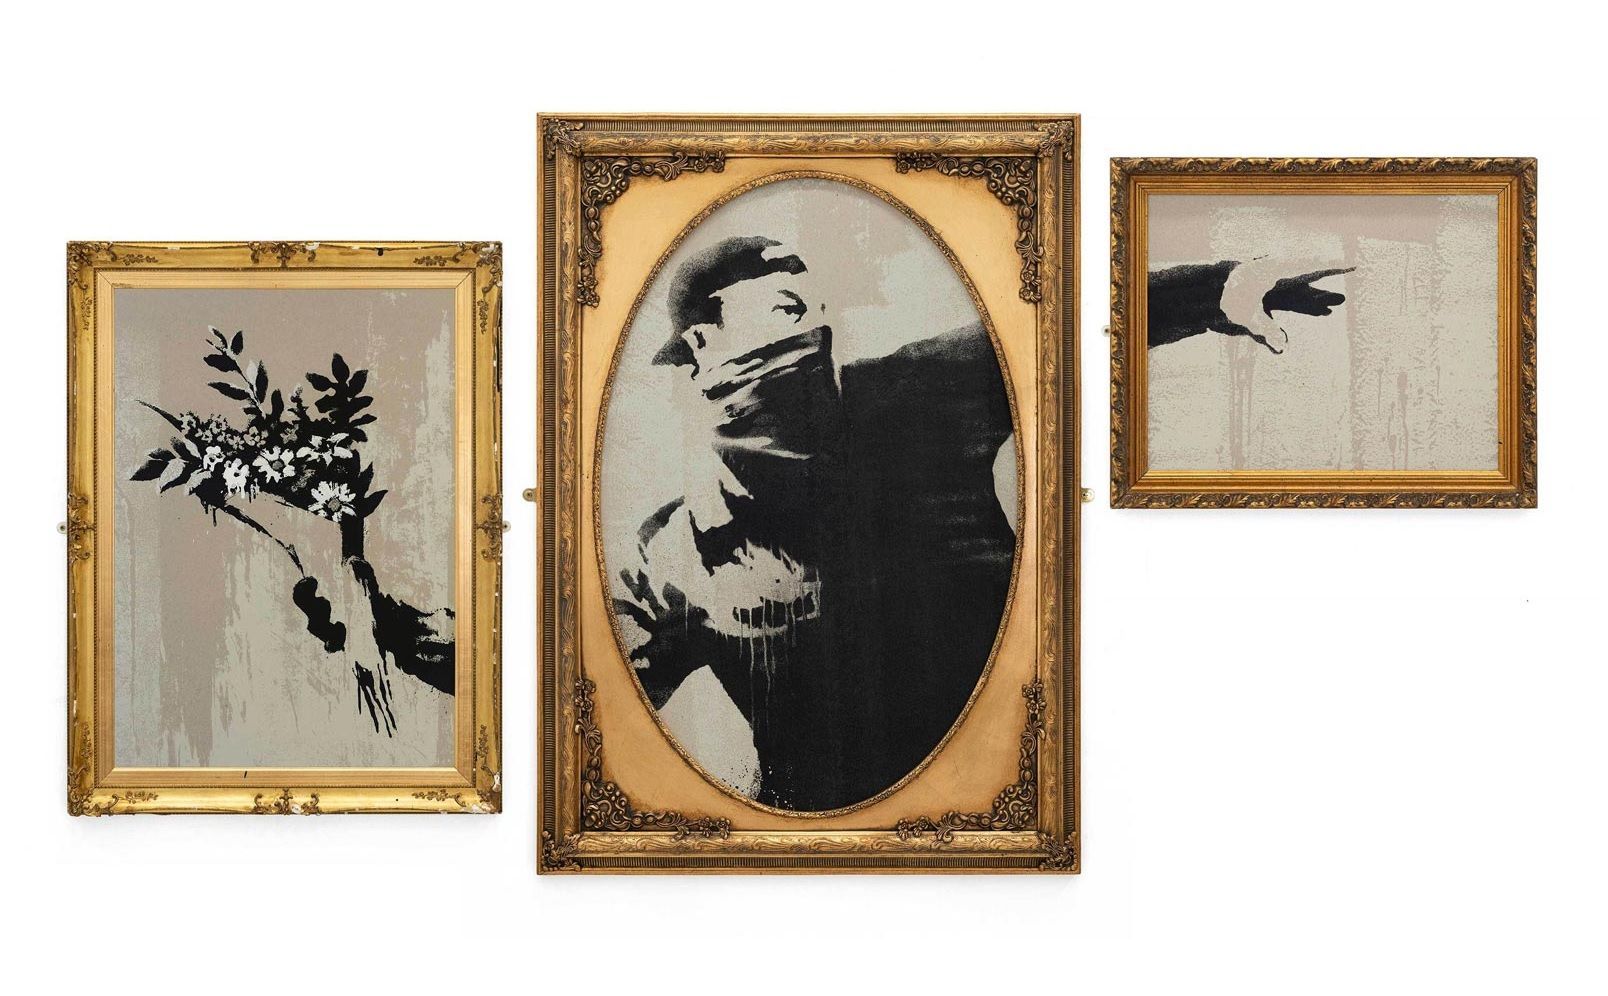 Banksy just opened an online store  Gross Domestic Product sells art, homewares, and disappointment